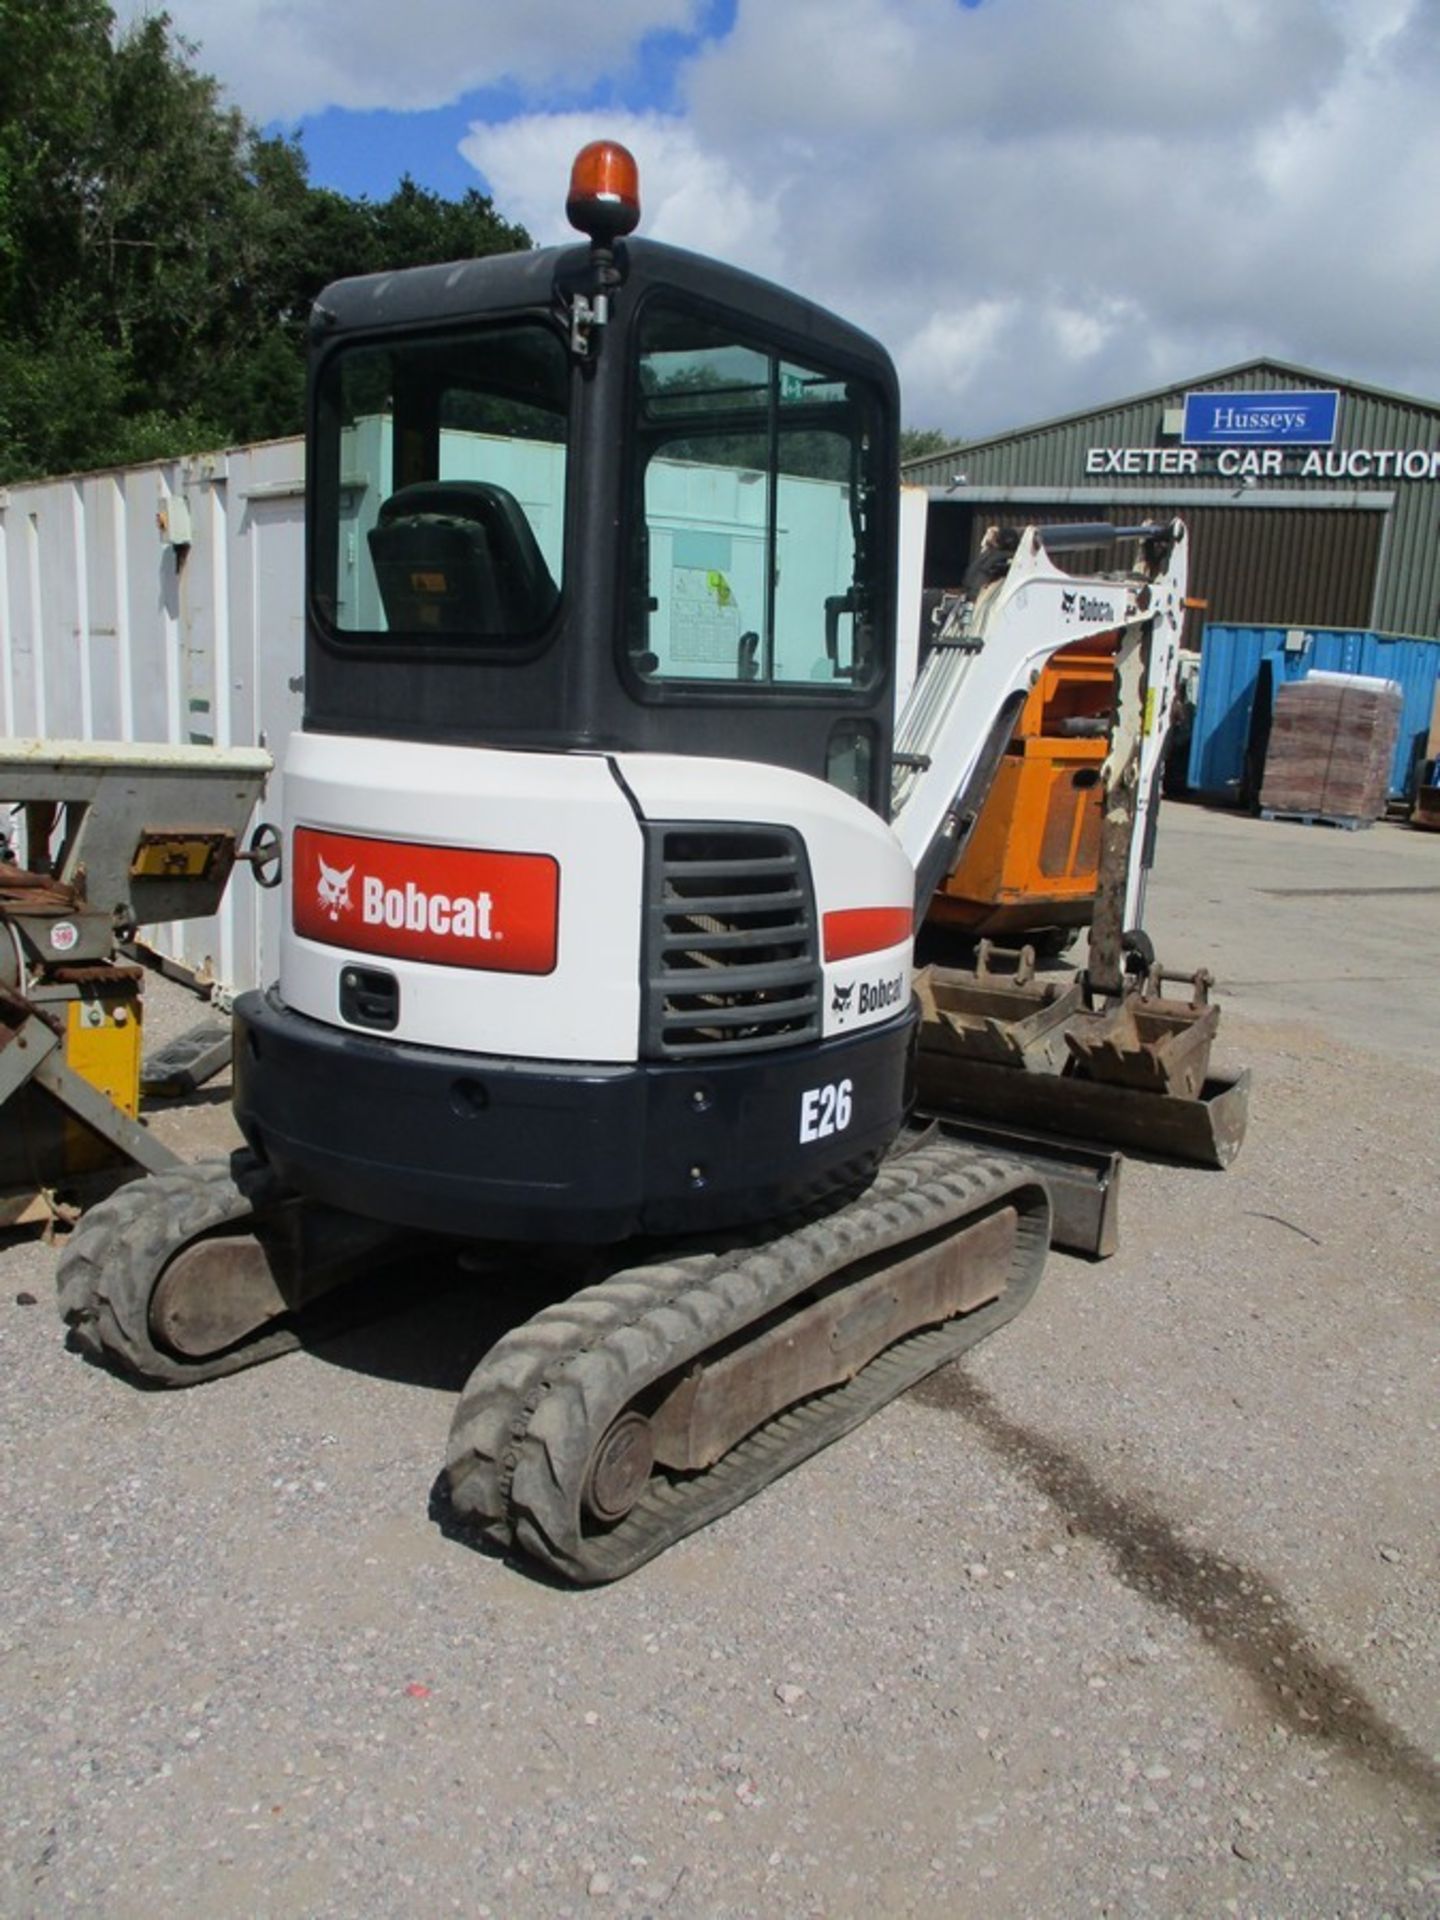 BOBCAT E26 DIGGER C.W 3 BUCKETS 2018 2039HRS PIPED FOR HAMMER, MANUAL QH - Image 2 of 8